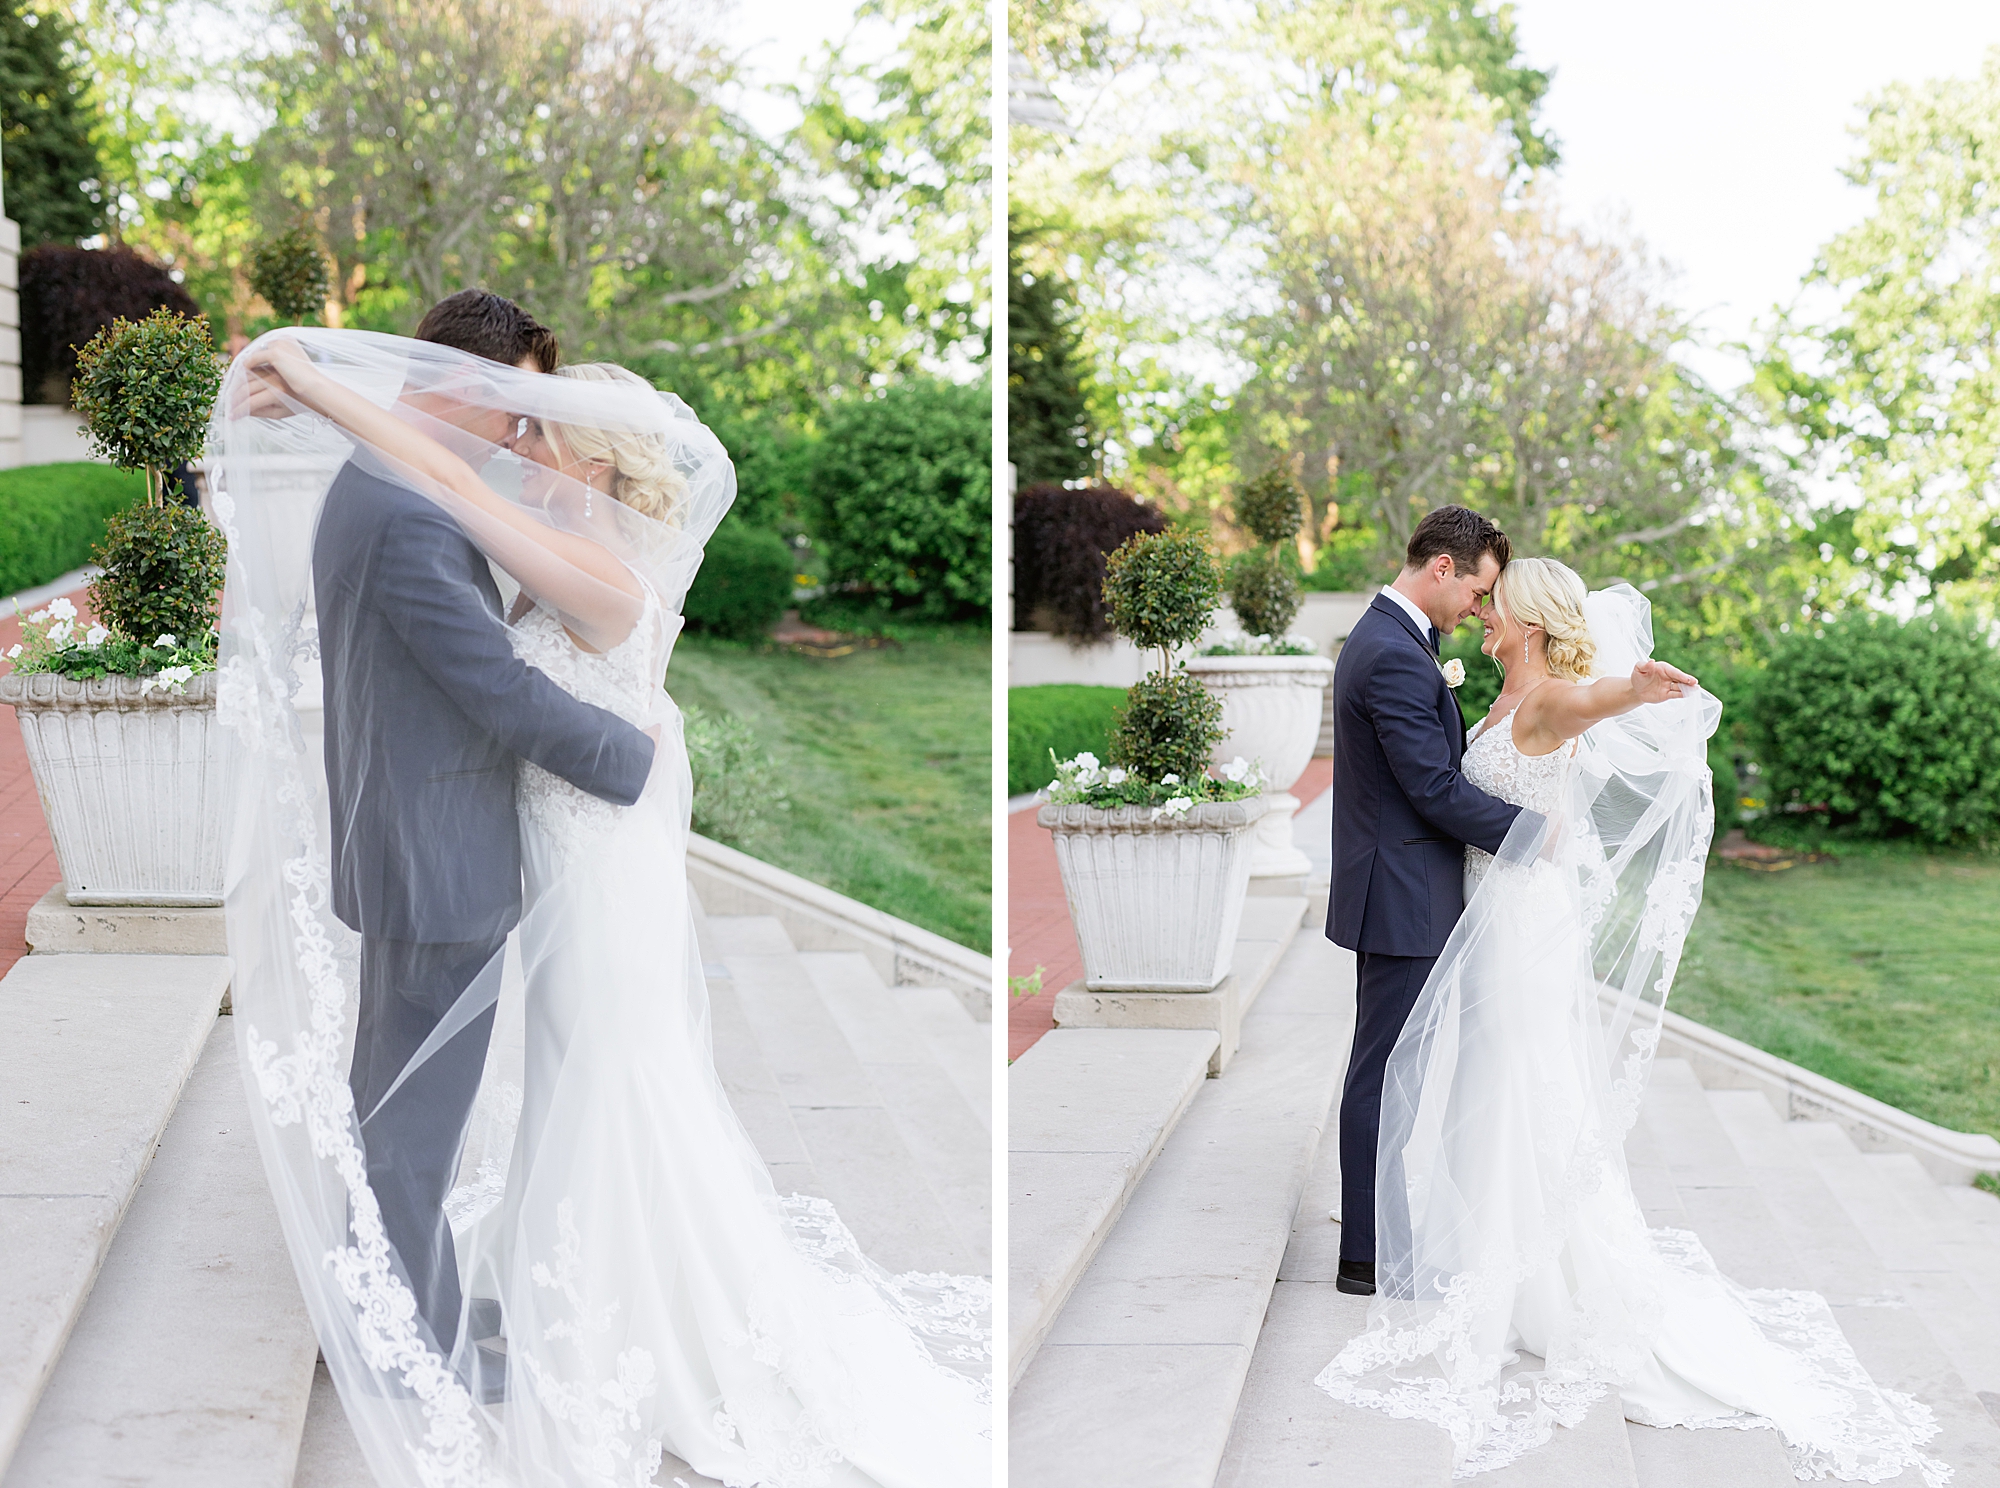 An elegant early summer War Memorial tent wedding in Grosse Pointe, Michigan on the water by Breanne Rochelle Photography.